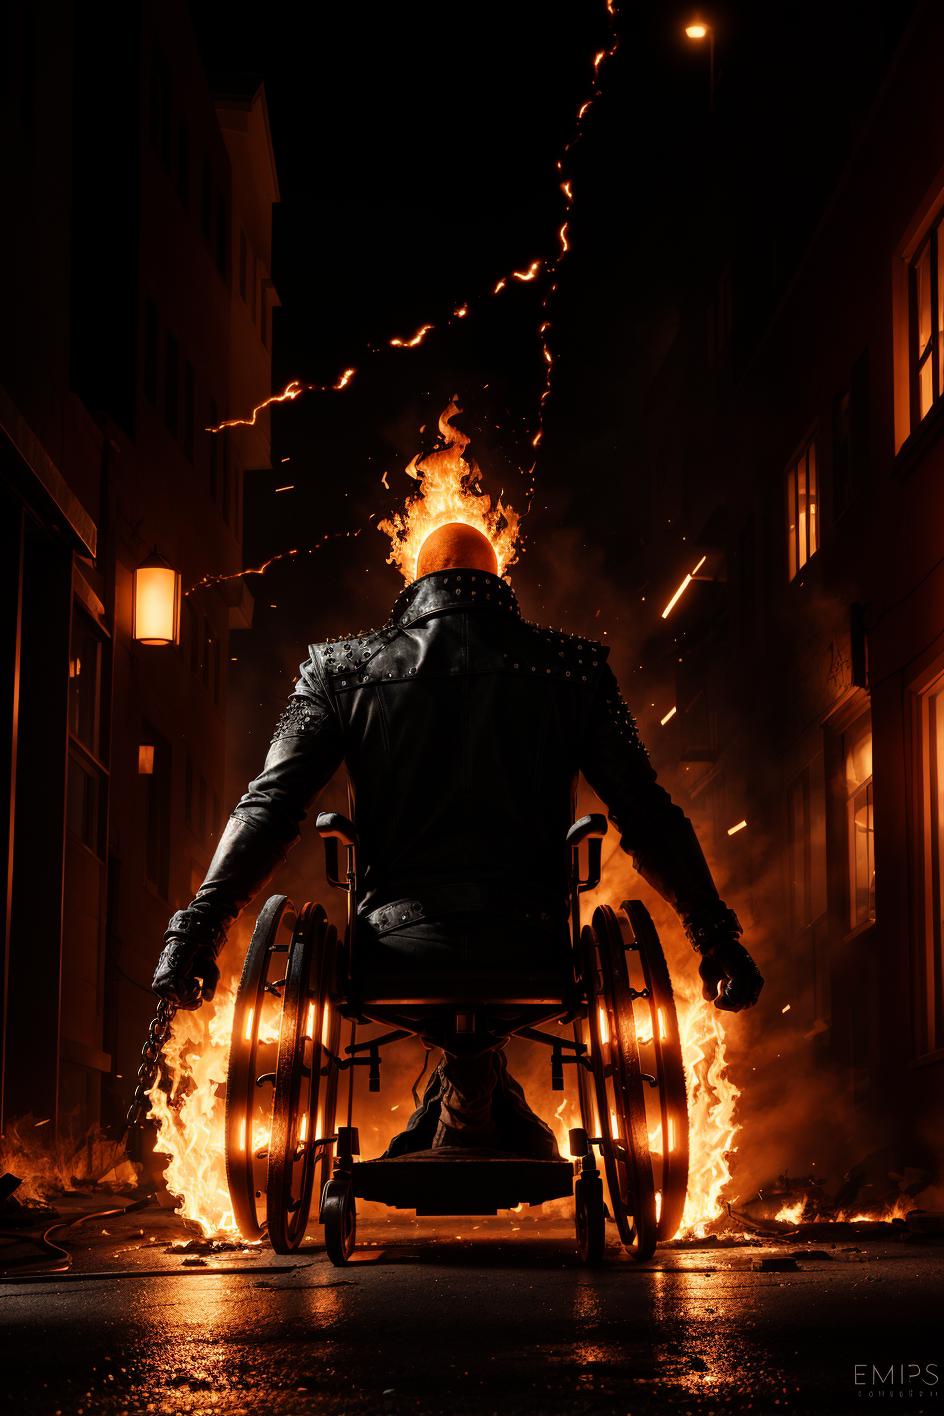 A wheelchair-bound man with flames behind him, possibly a superhero or demonic figure.